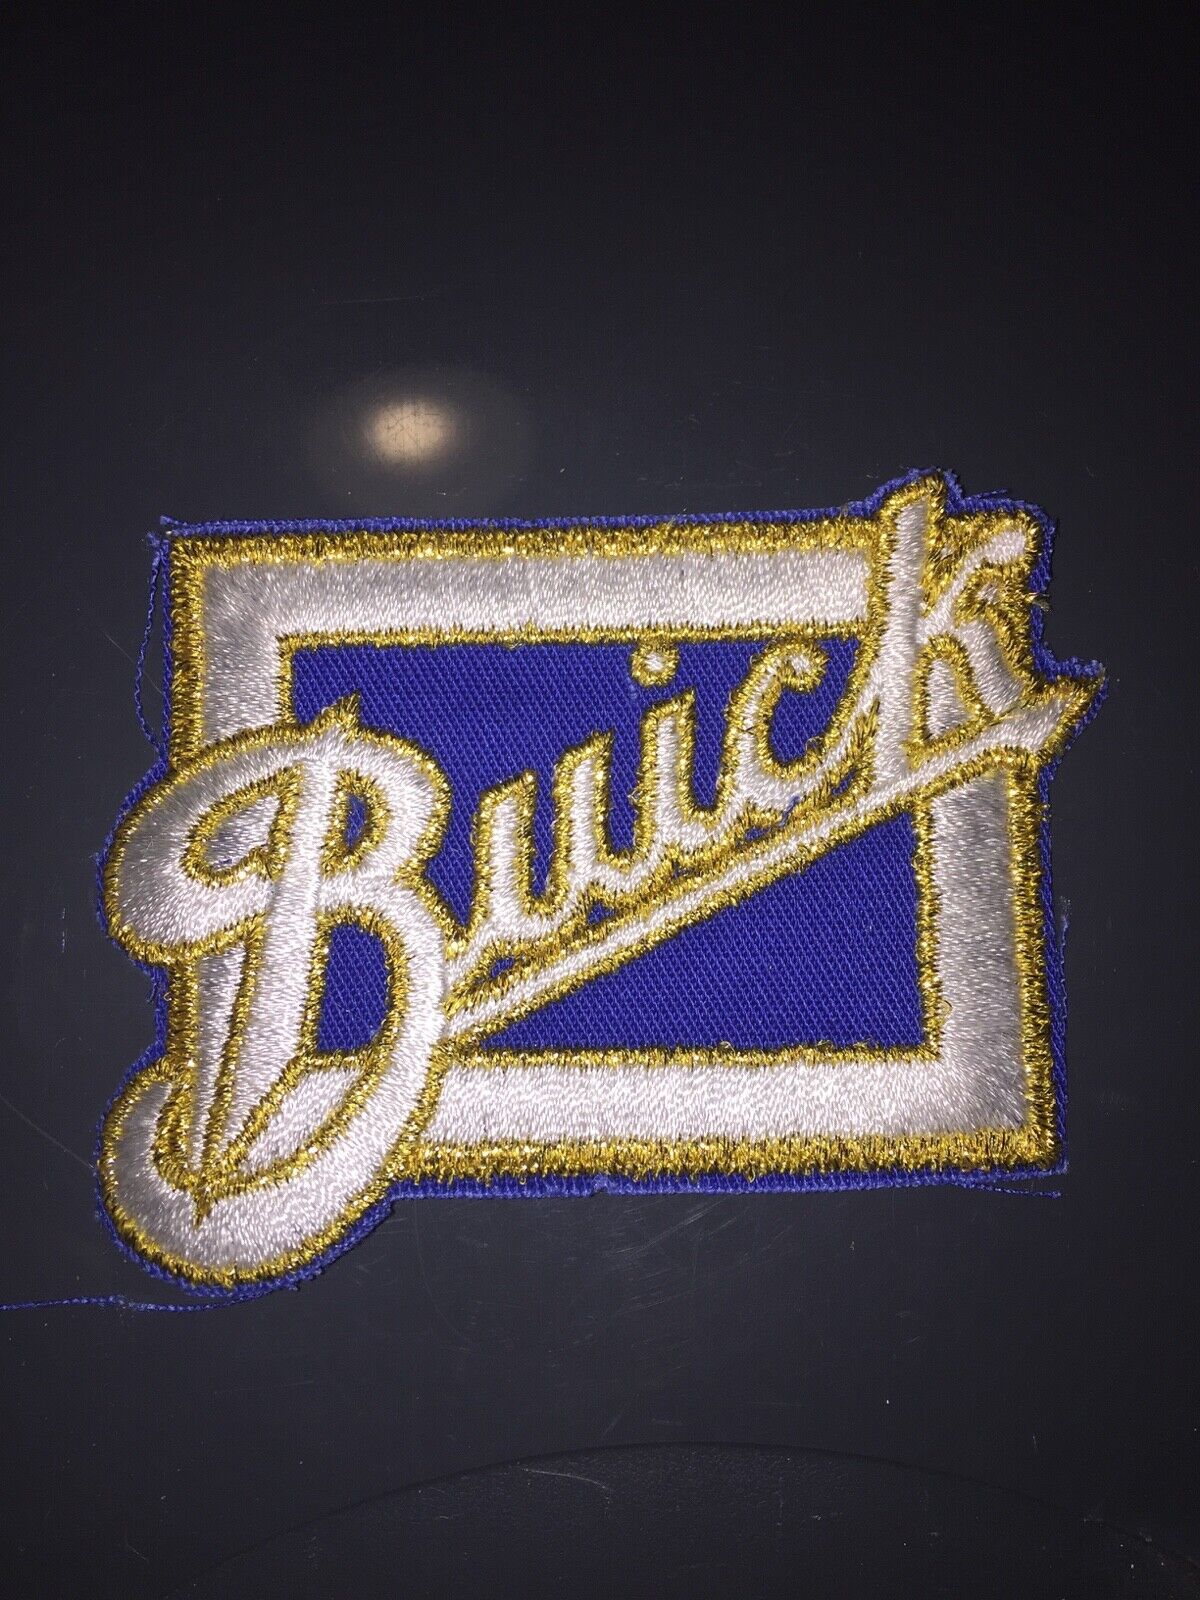 Vintage Buick sew on patch, Vintage Buick patch